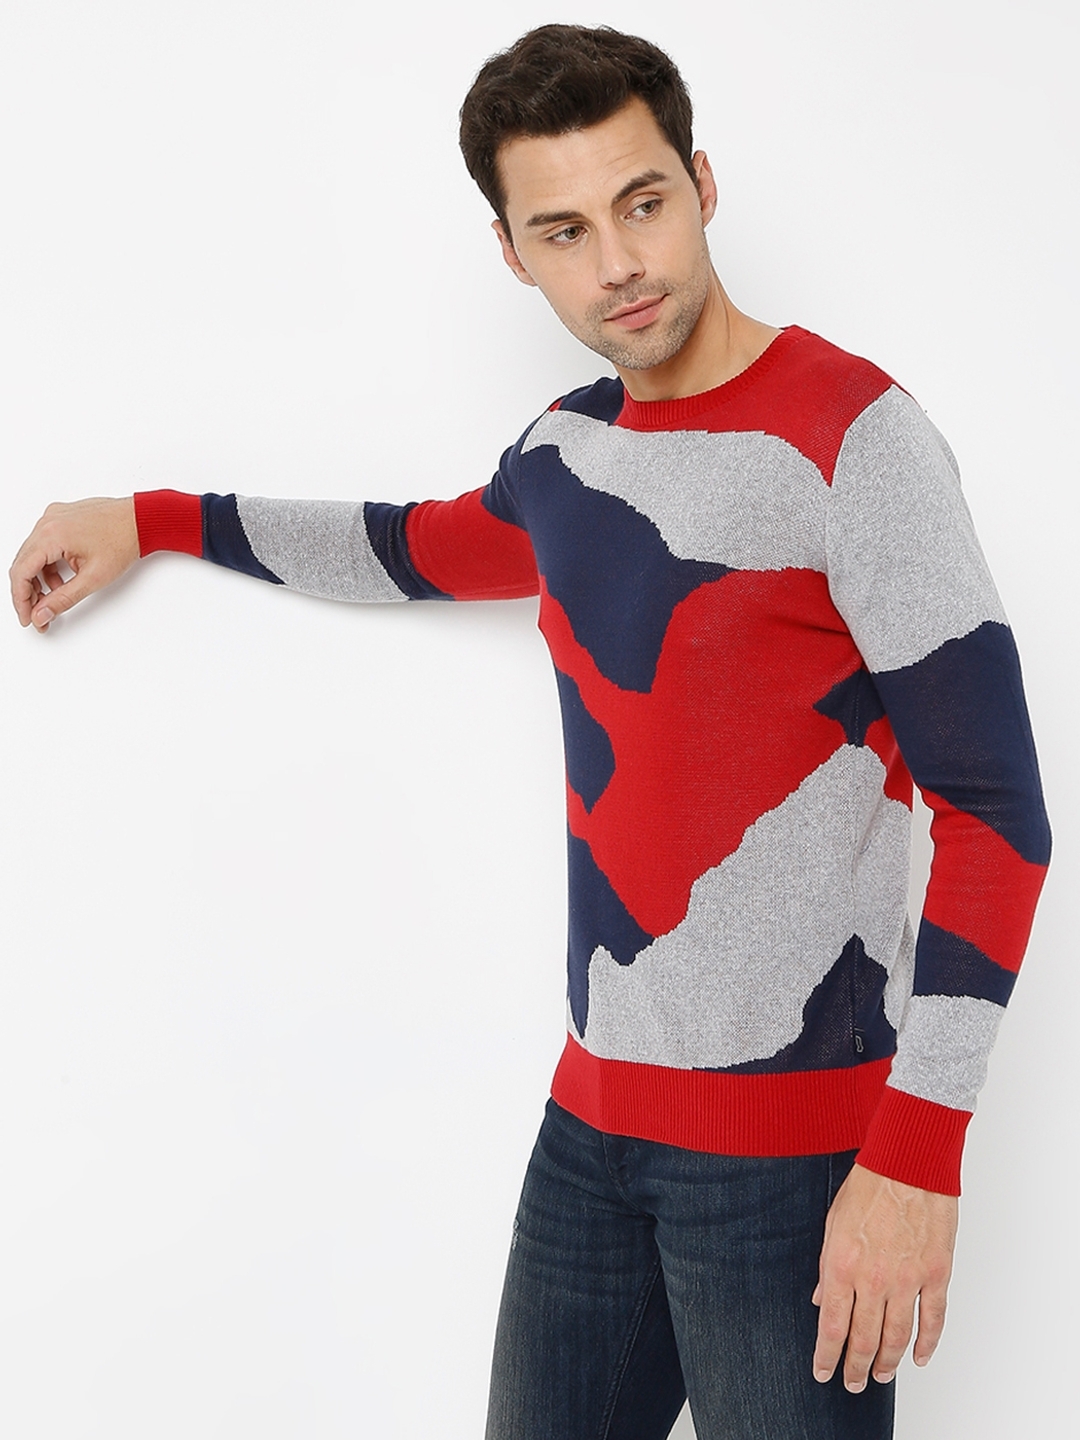 Men's ROBIN IN knitted slim fit sweater